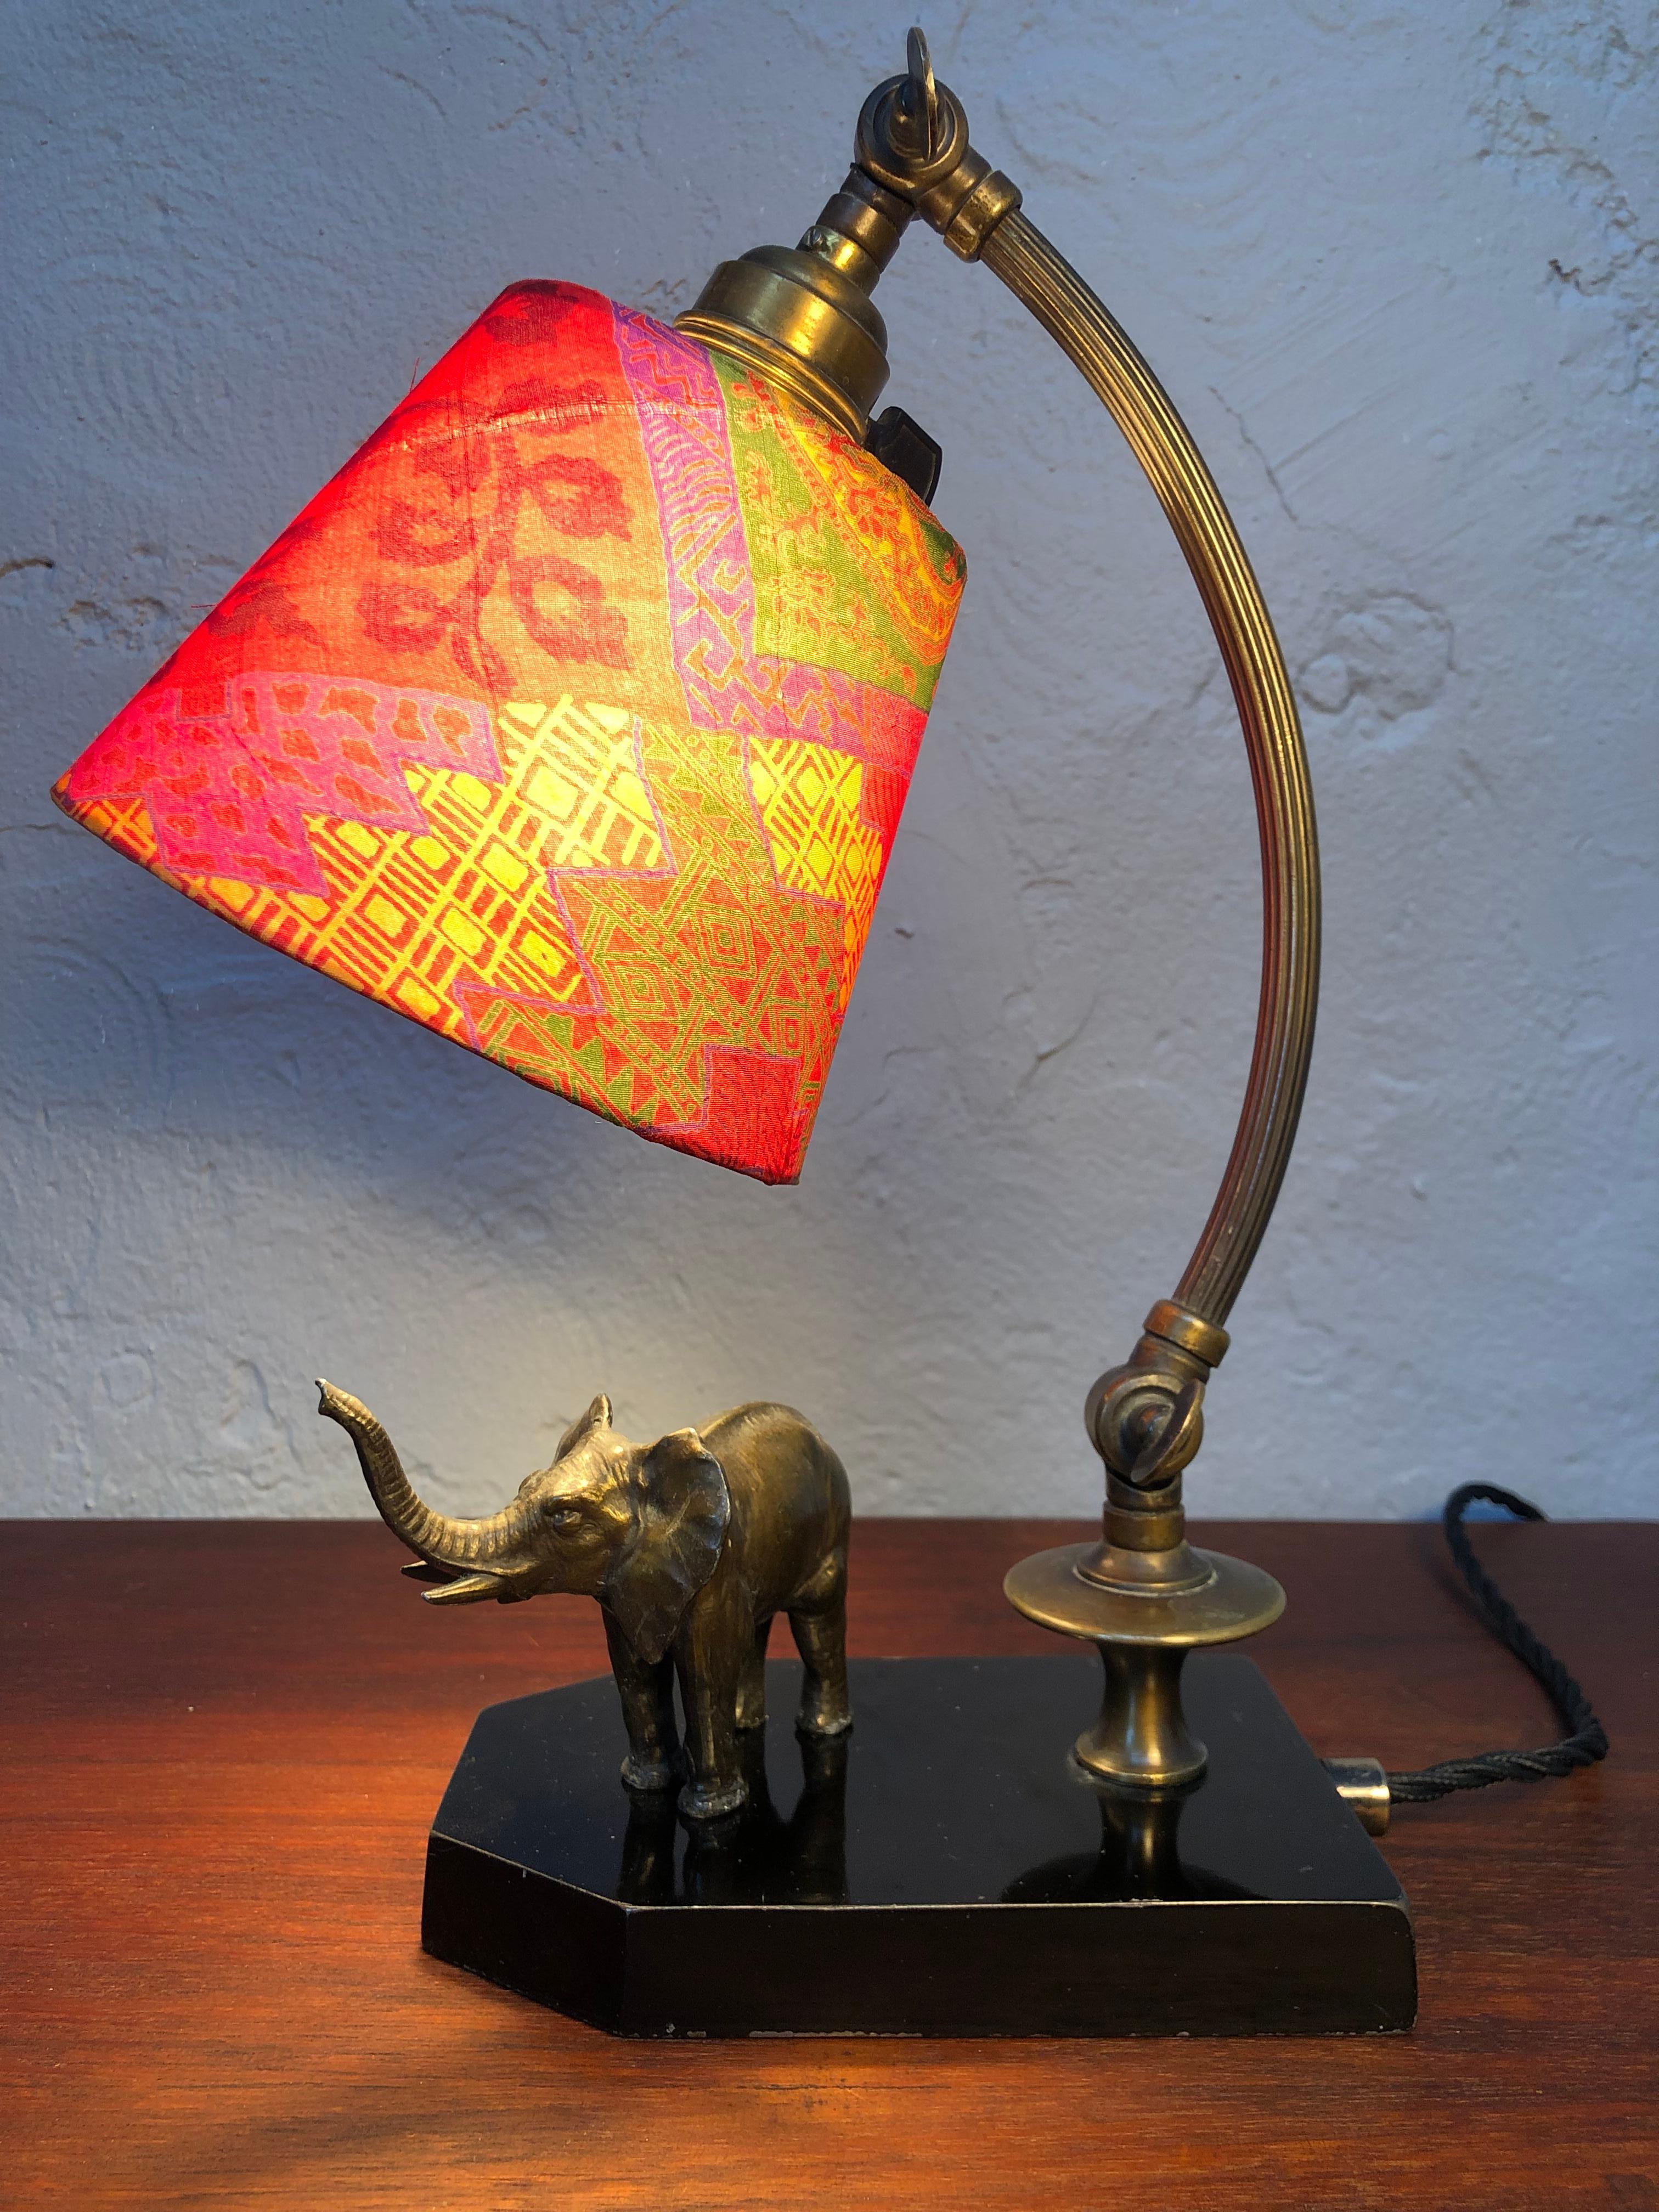 A lovely antique elephant table piano lamp in brass.
Original shade refurbished with silk from an antique kimono.
Original brass and ceramic bulb holder with an on/off switch.
Painted metal base that has age related patina in the form of chips